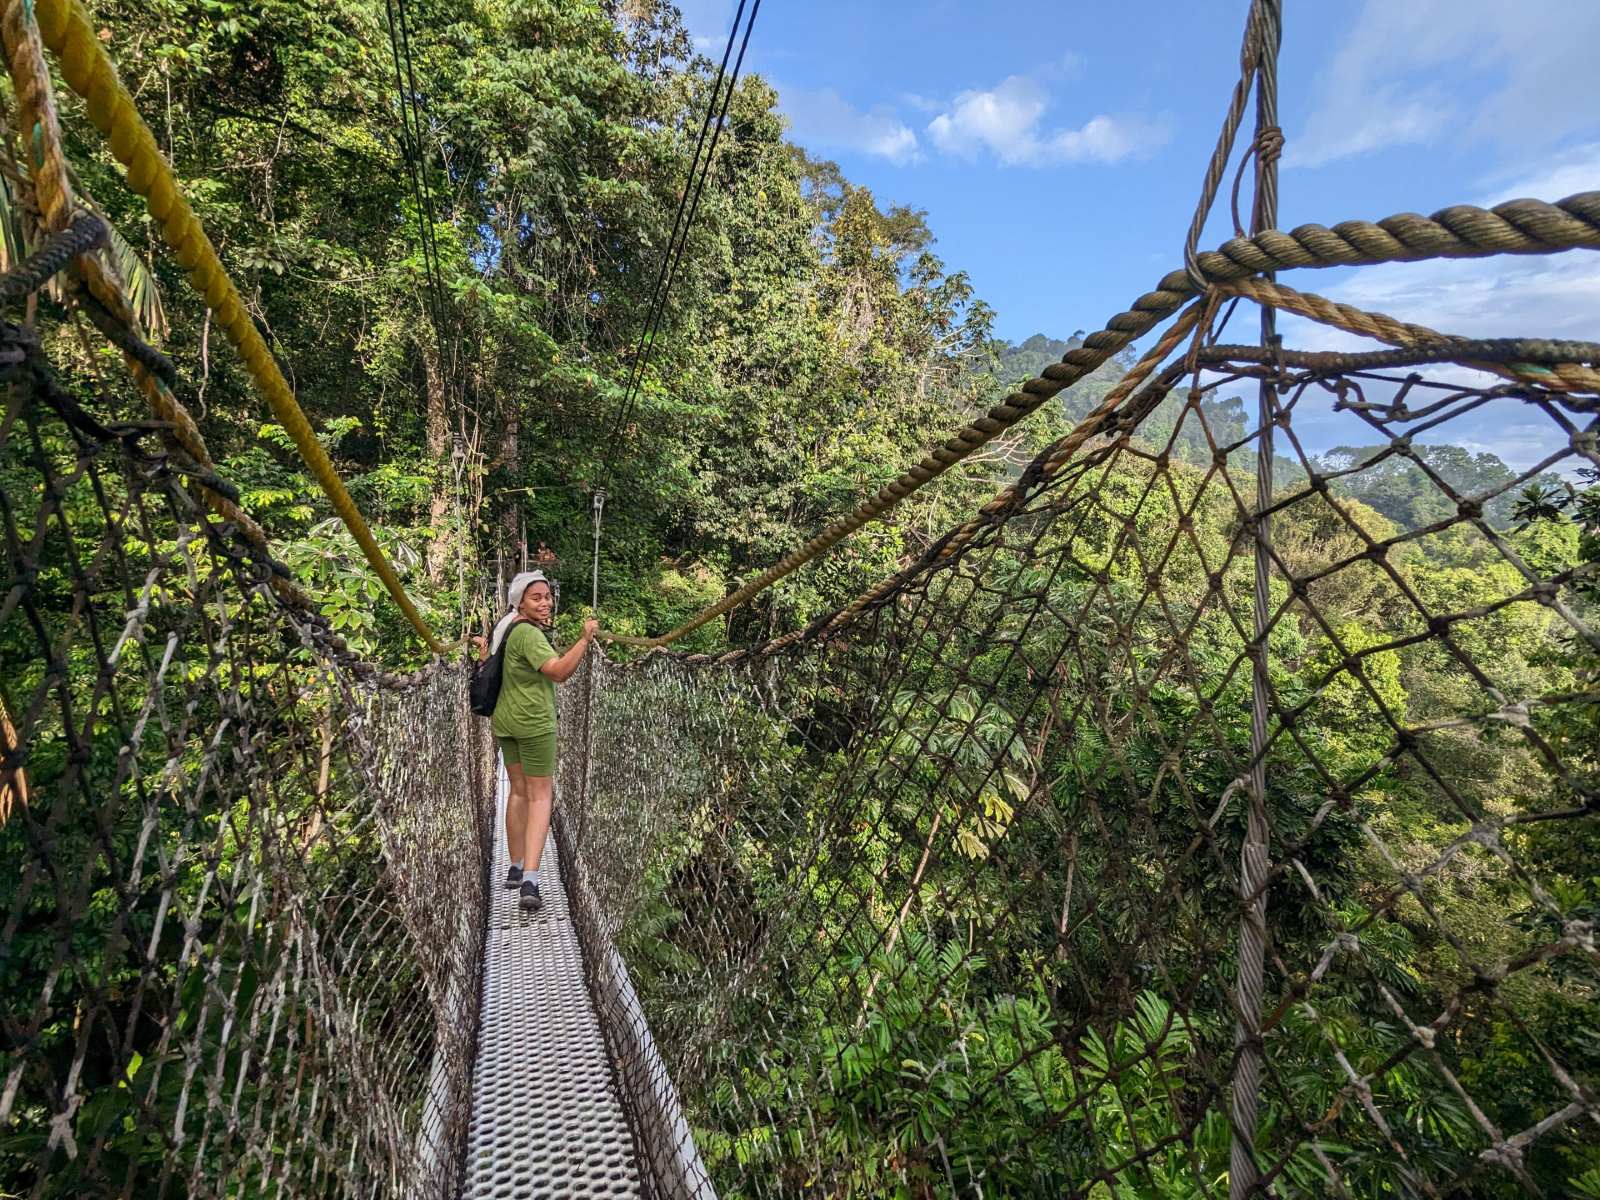 A student standing on a rope bridge.